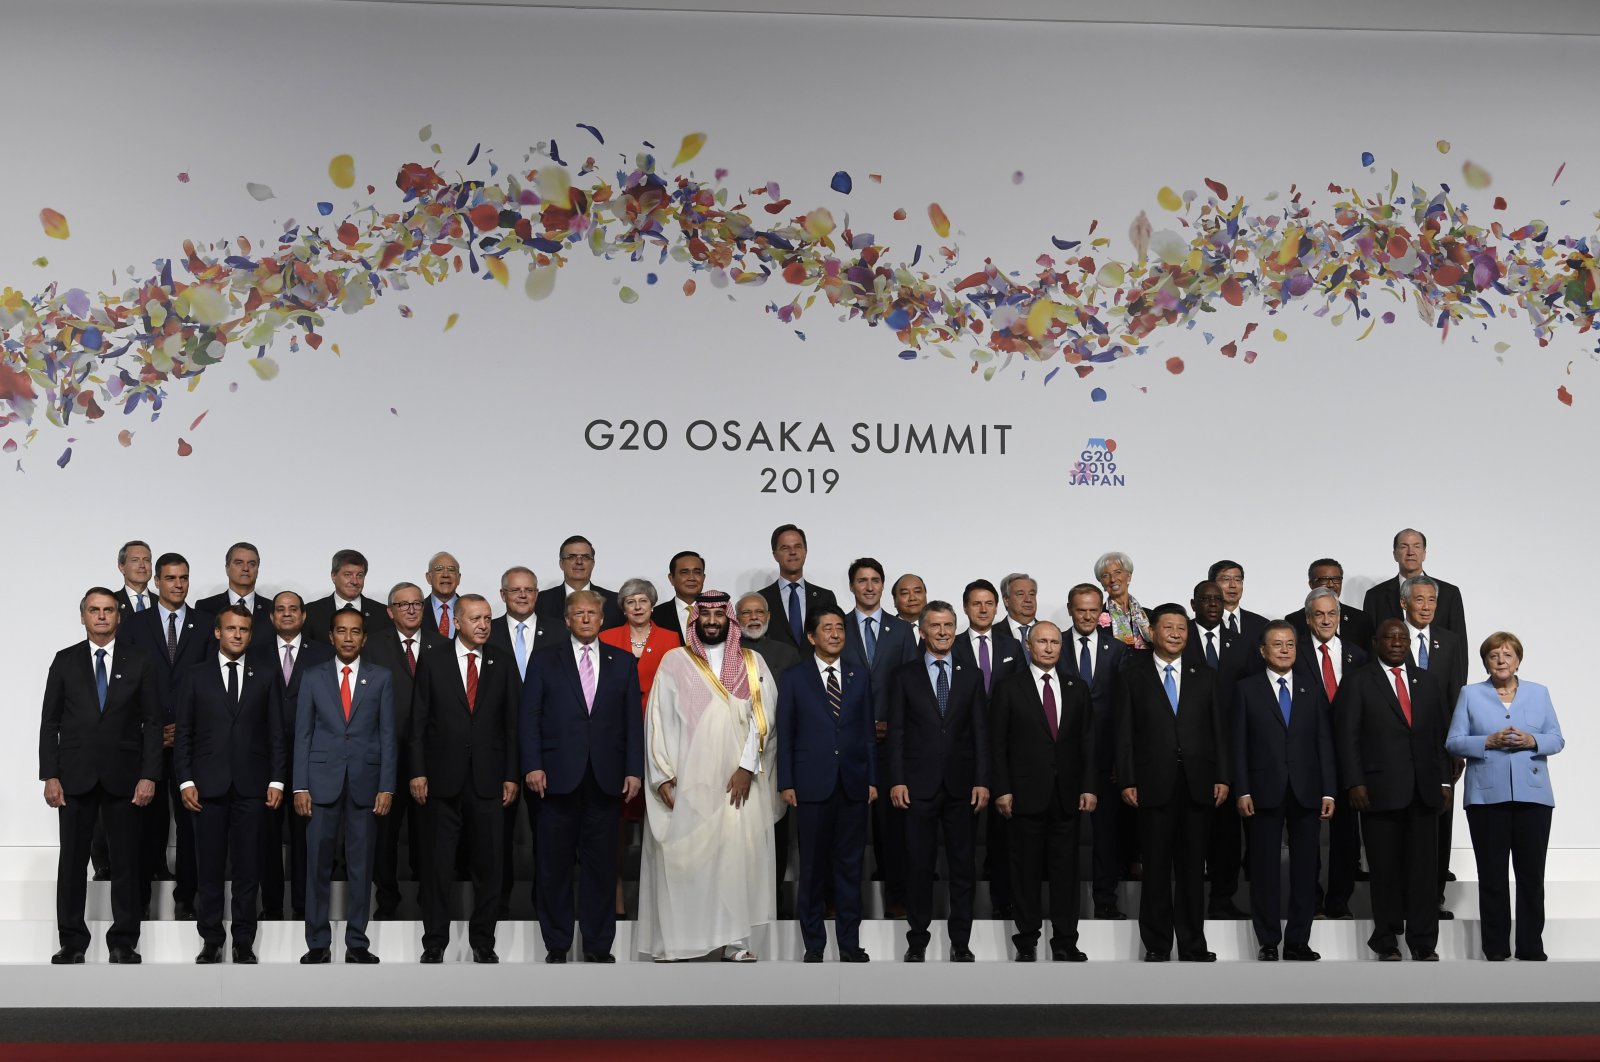 G20 leaders pose for a group photo at the G20 summit in Osaka, Japan, June 28, 2019. (AP Photo)